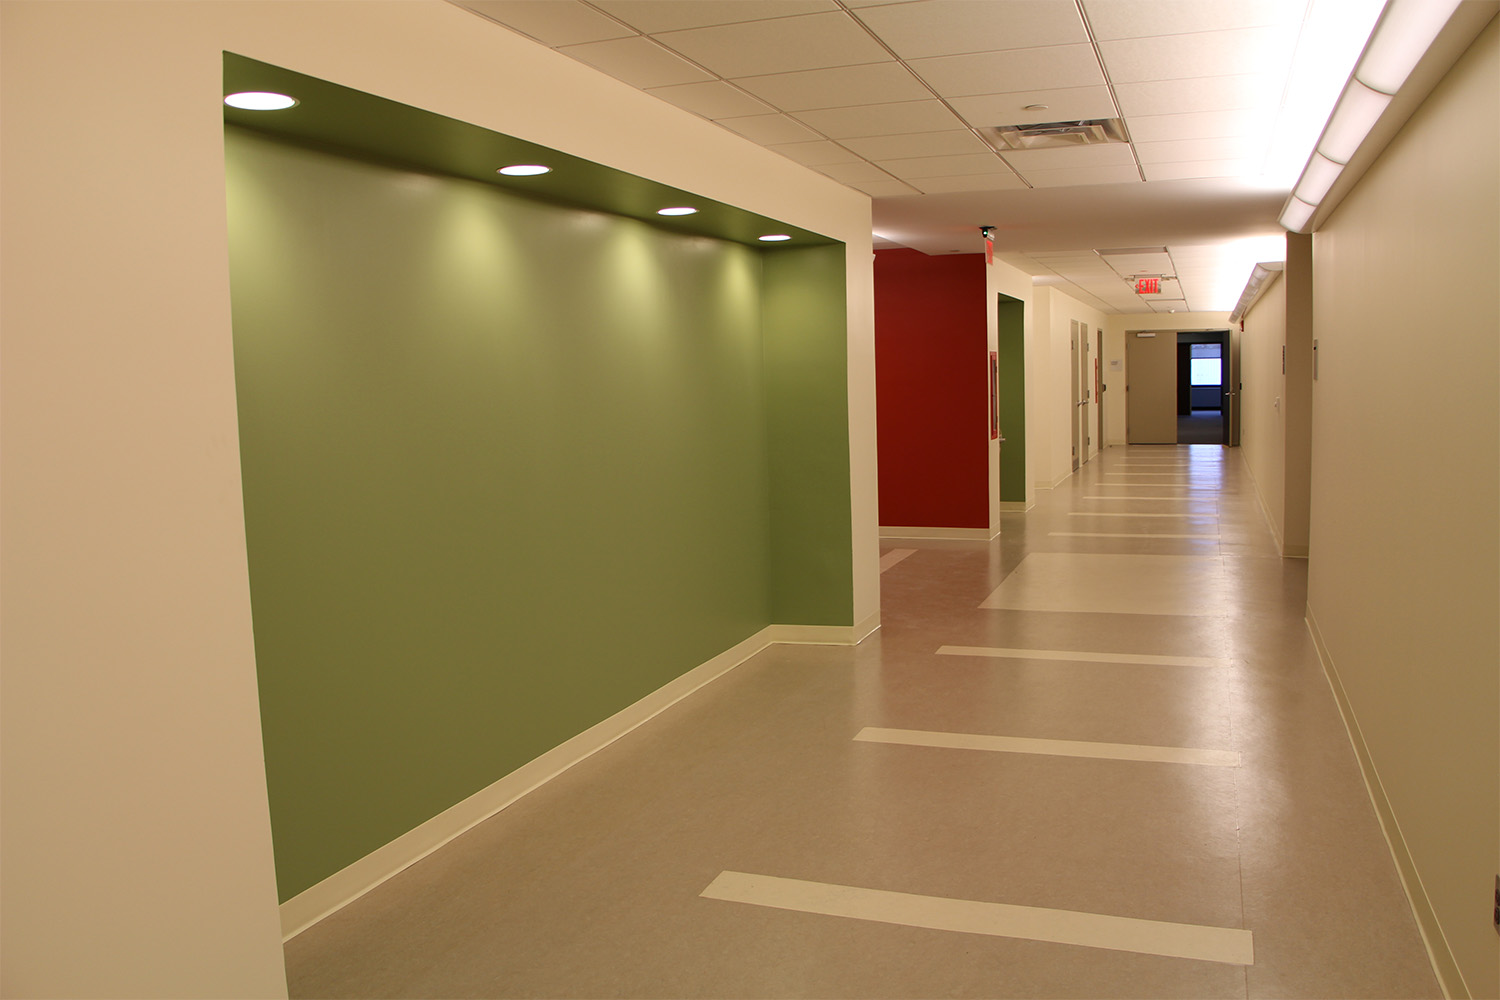 Long hallway with green wall